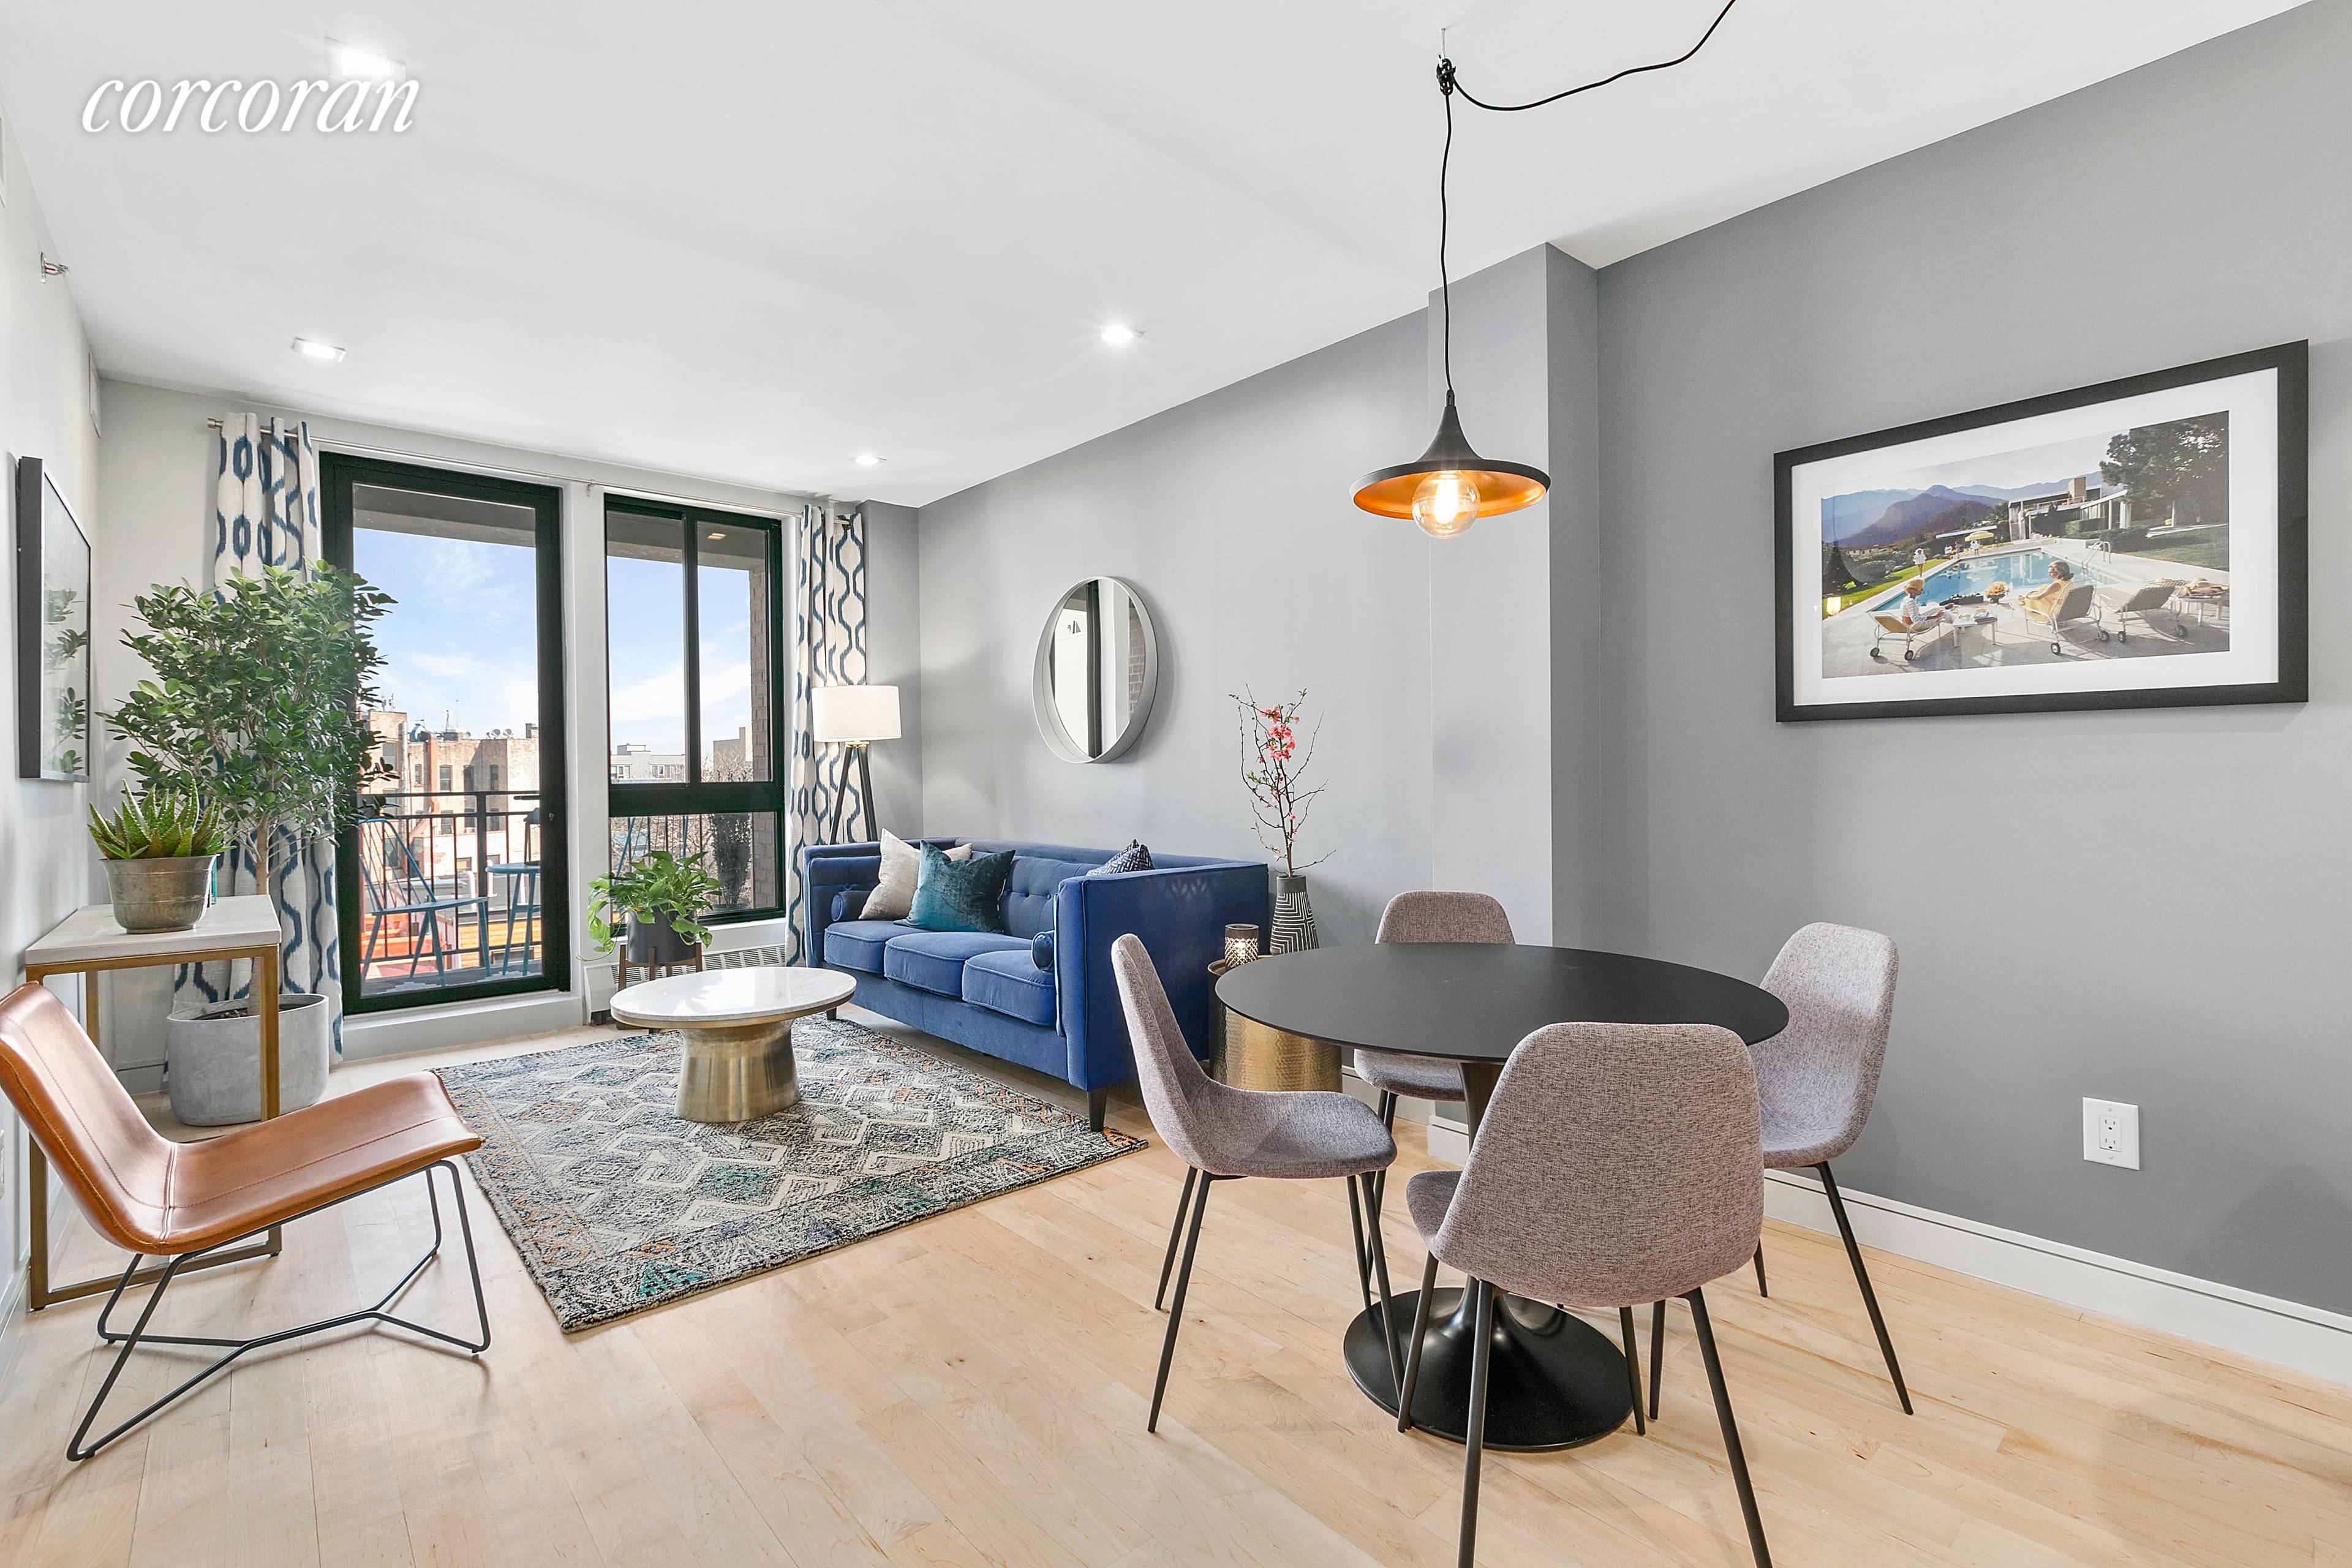 Introducing 336 St. Marks Avenue, The Newest Boutique Condominium in Bustling Prospect Heights Brooklyn.